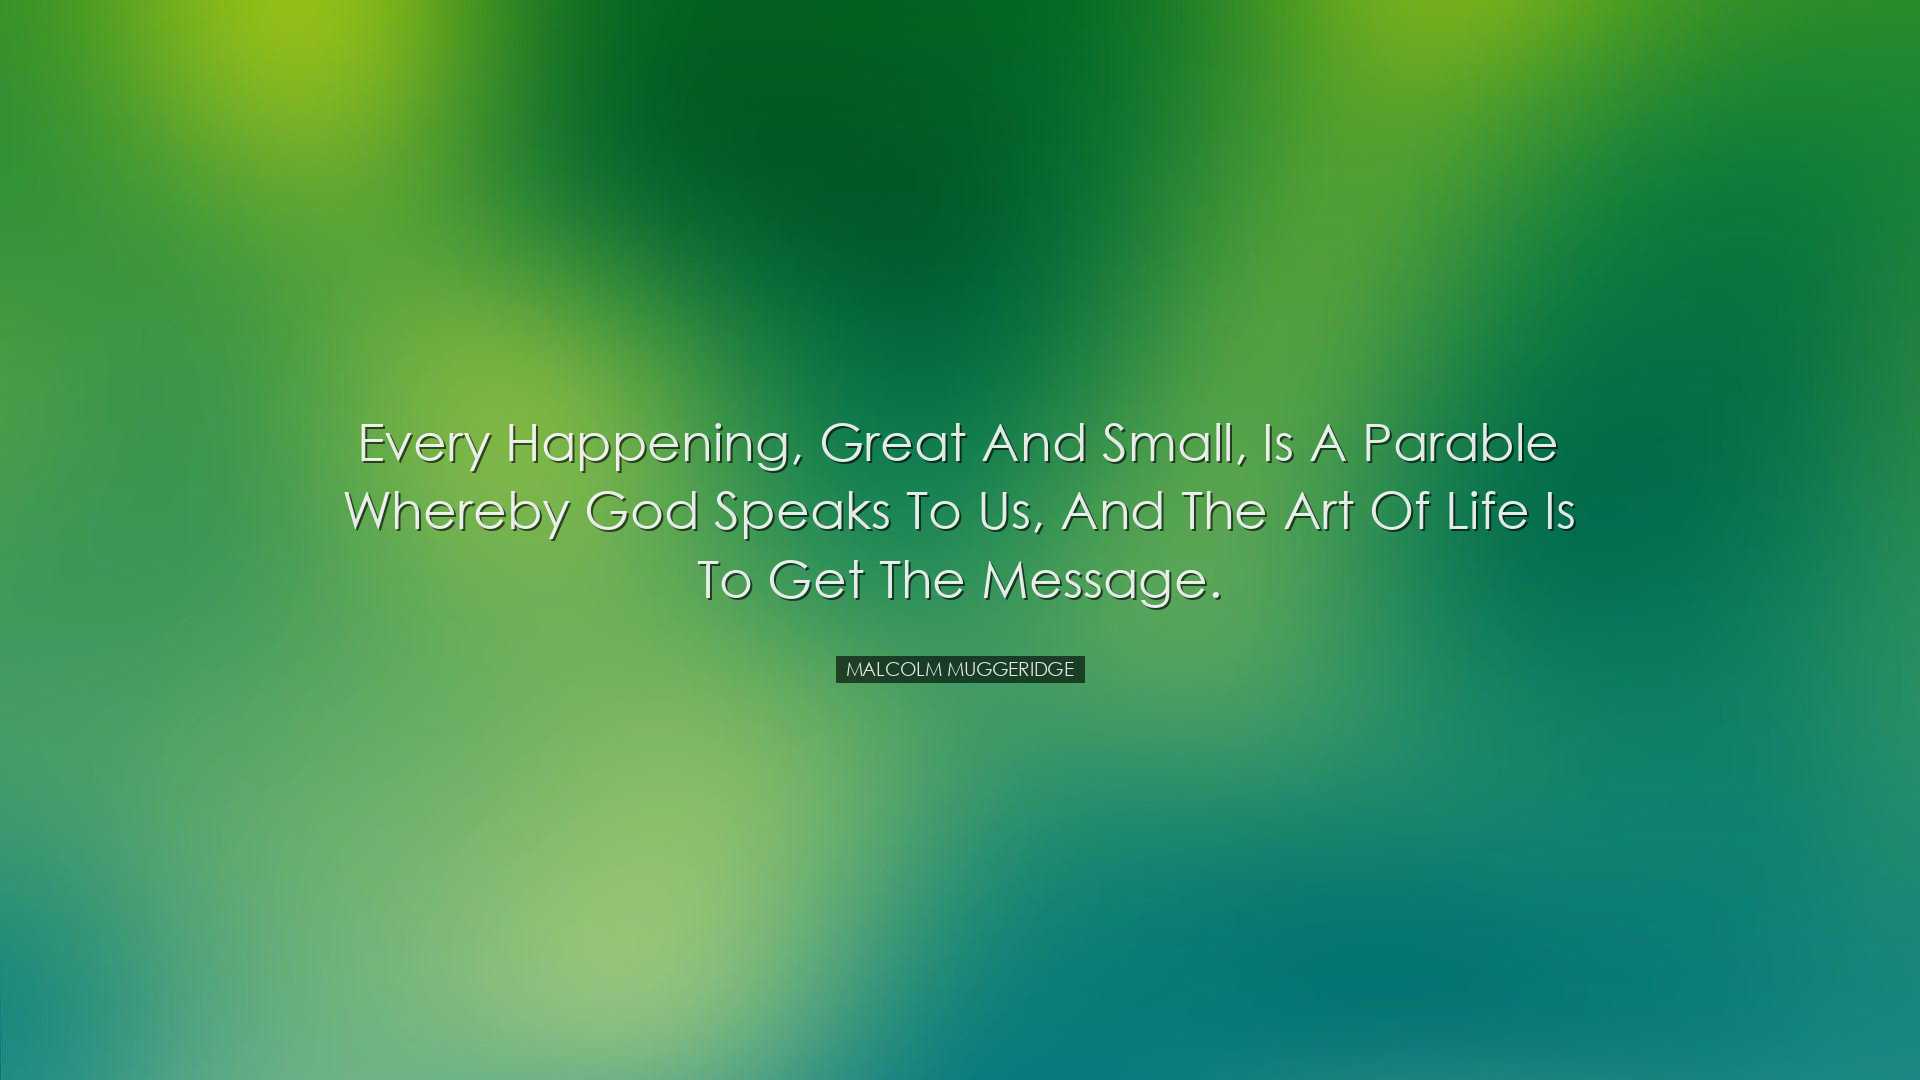 Every happening, great and small, is a parable whereby God speaks